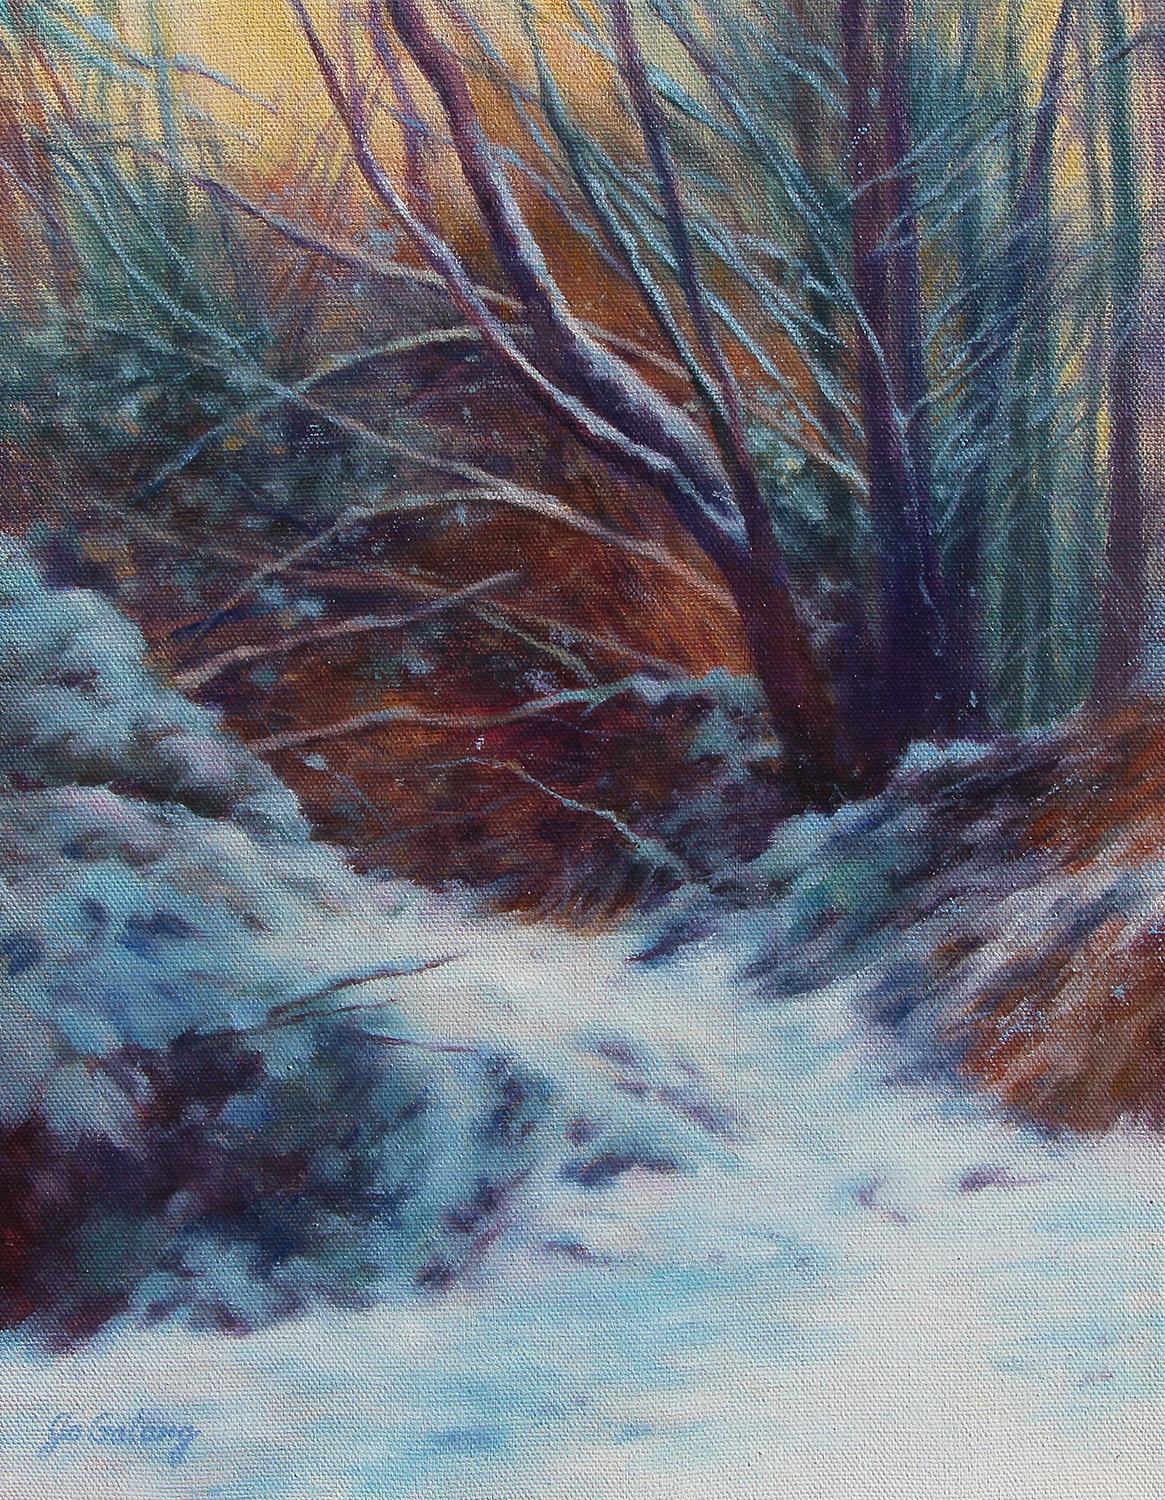 Jo Galang Landscape Painting - First Snow, Oil Painting